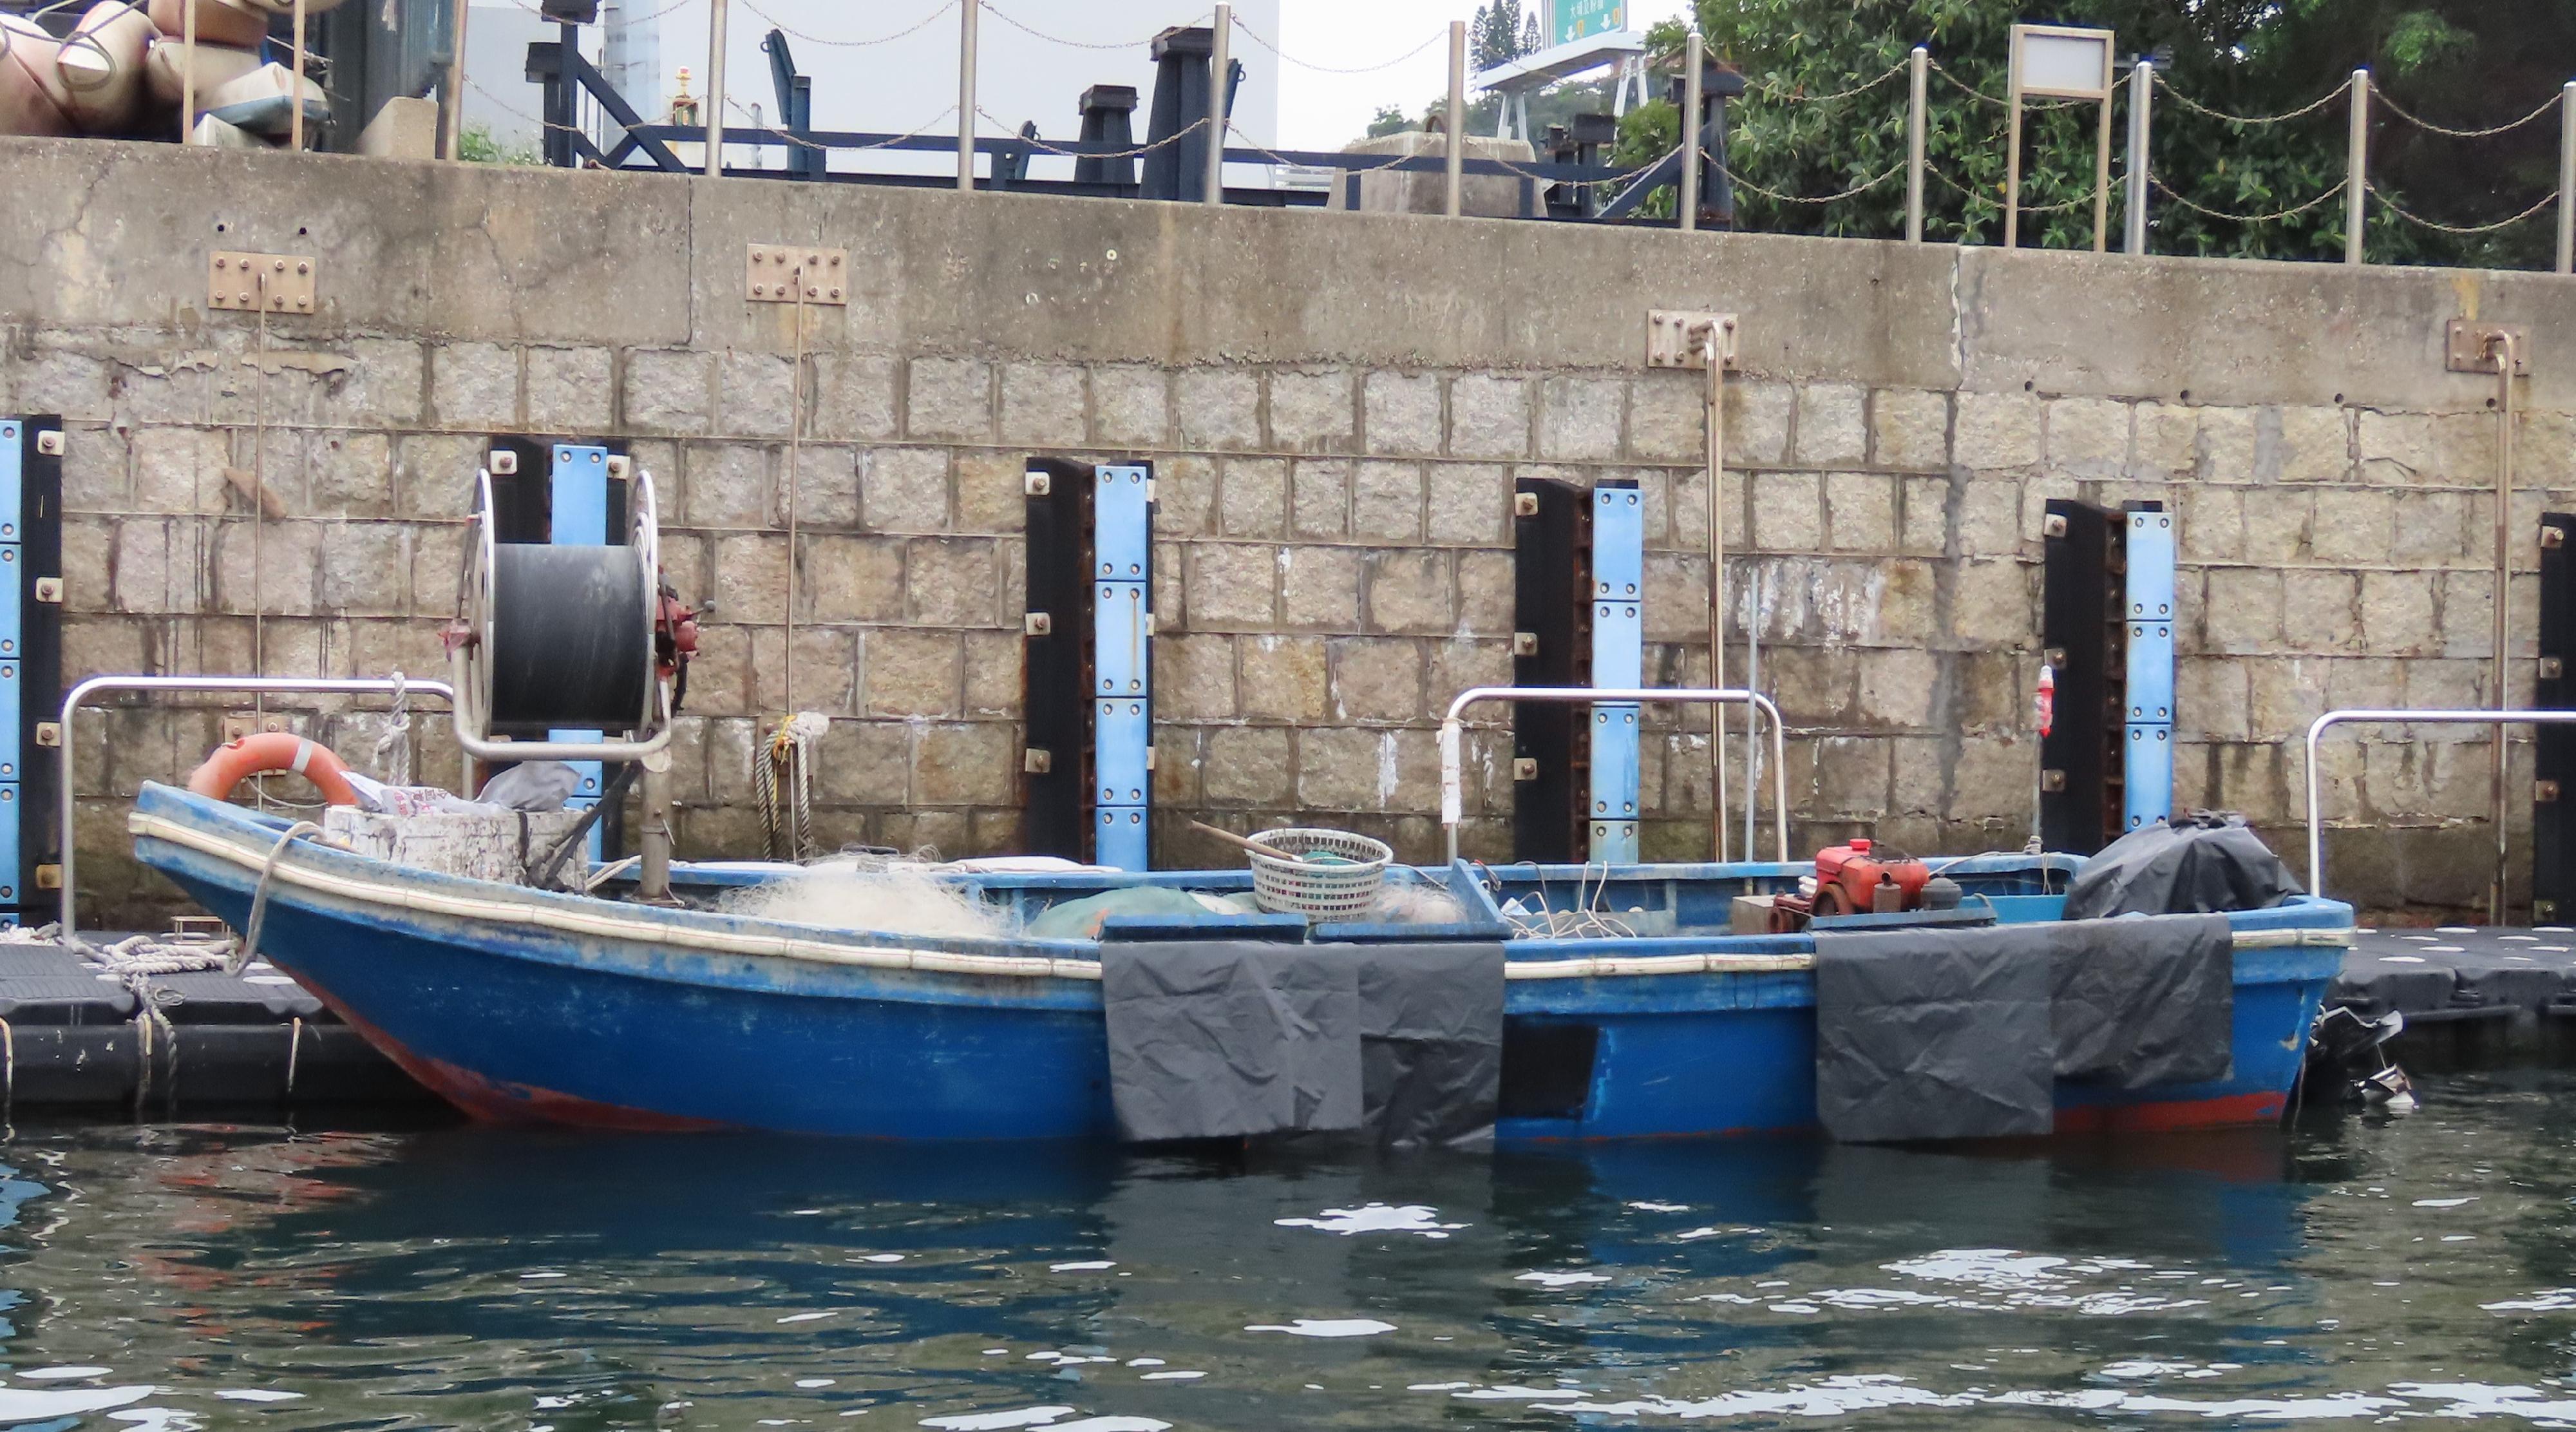 The Agriculture, Fisheries and Conservation Department today (April 27) laid charges against two Mainland men suspected of engaging in illegal fishing with gill nets in the Hoi Ha Wan Marine Park. Photo shows the intercepted vessel.